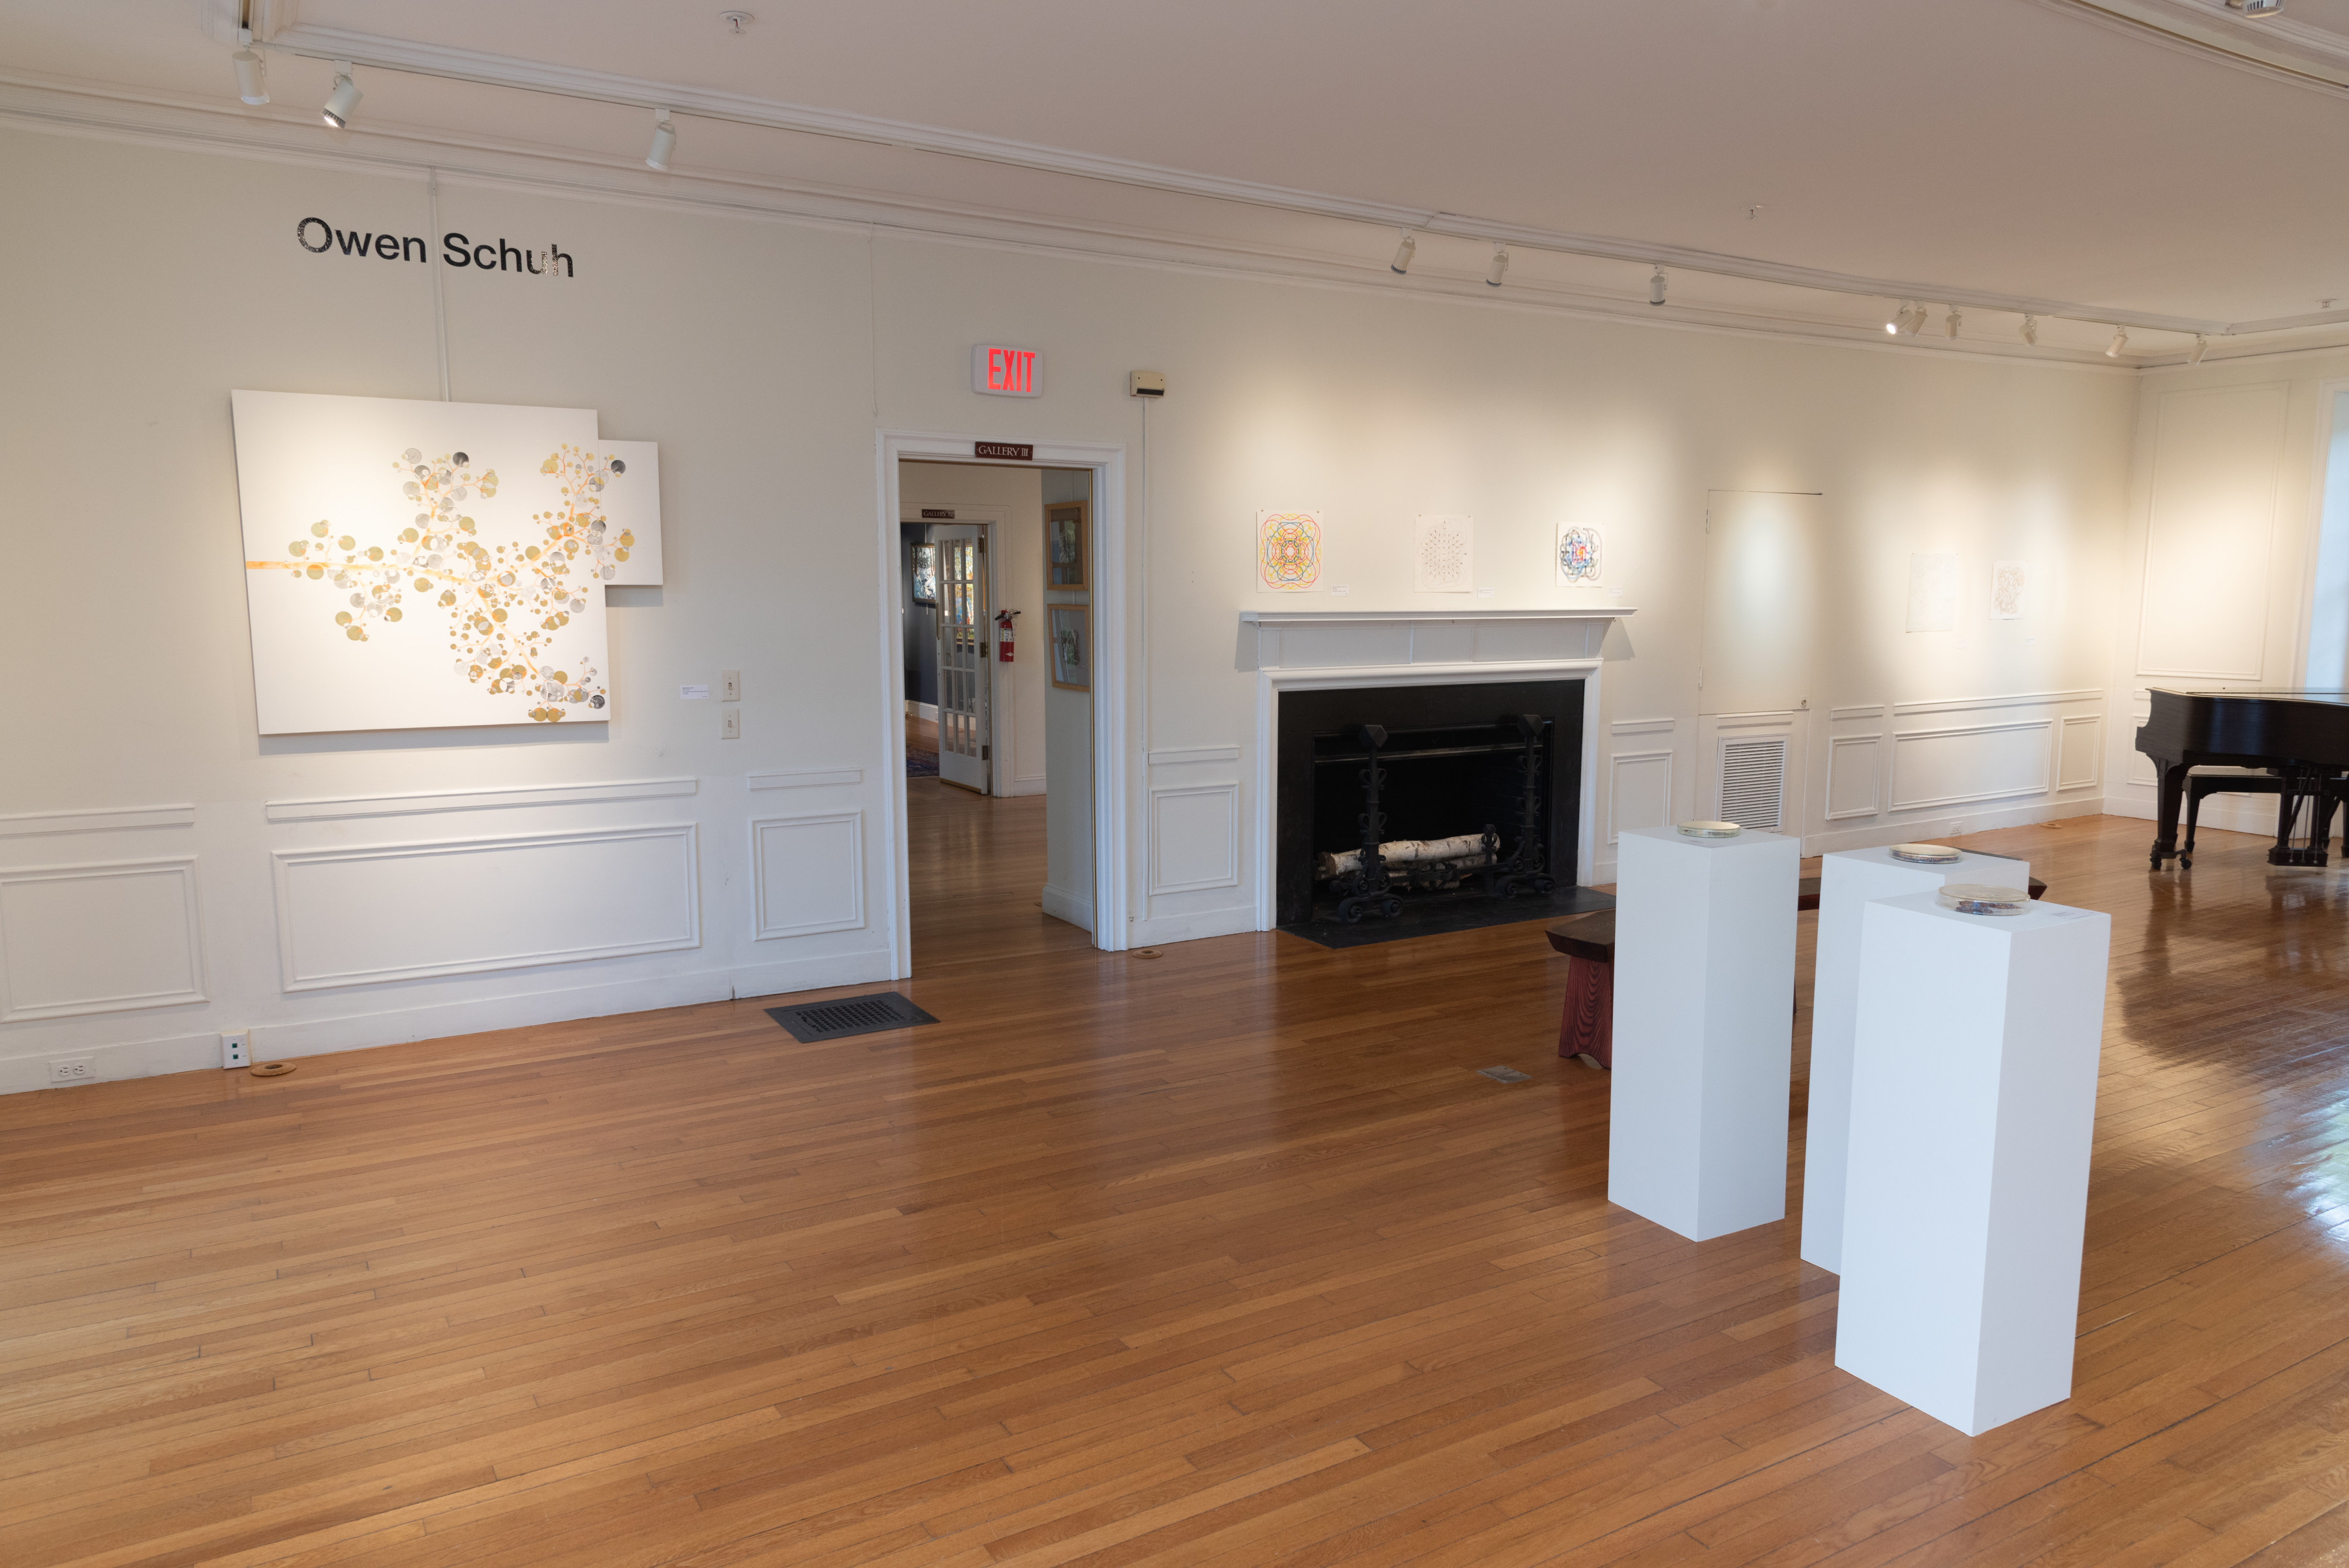 Owen Schuh: Branchings & Configurations - Southern Vermont Arts Center - Viewing Room - Silas Von Morisse Viewing Room